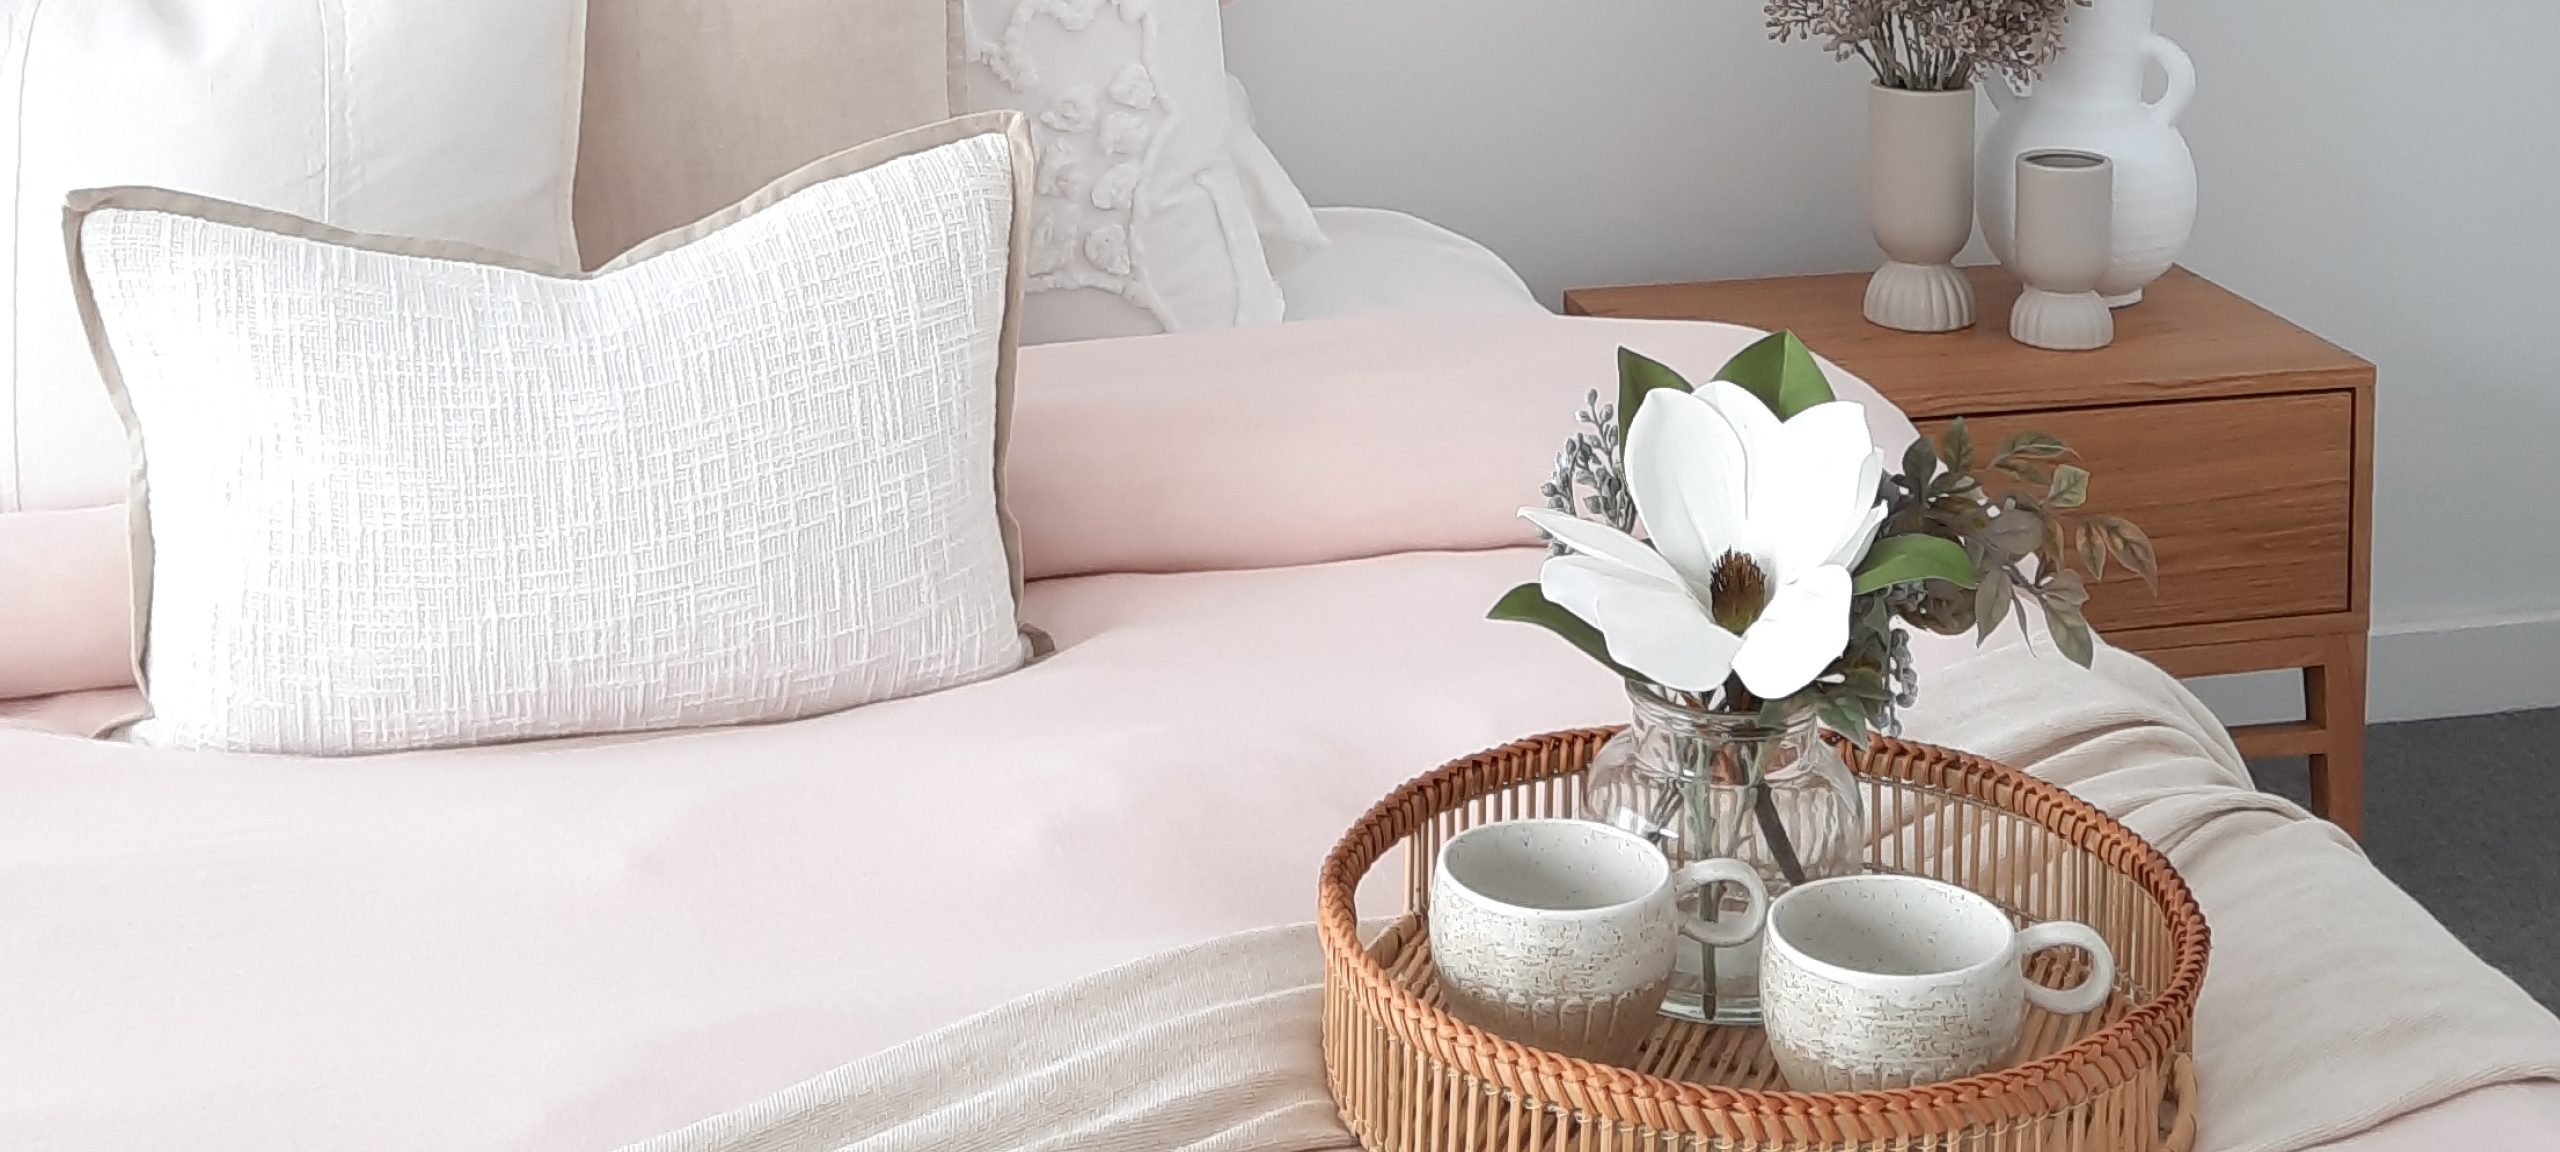 Pillow Talk home styling trays